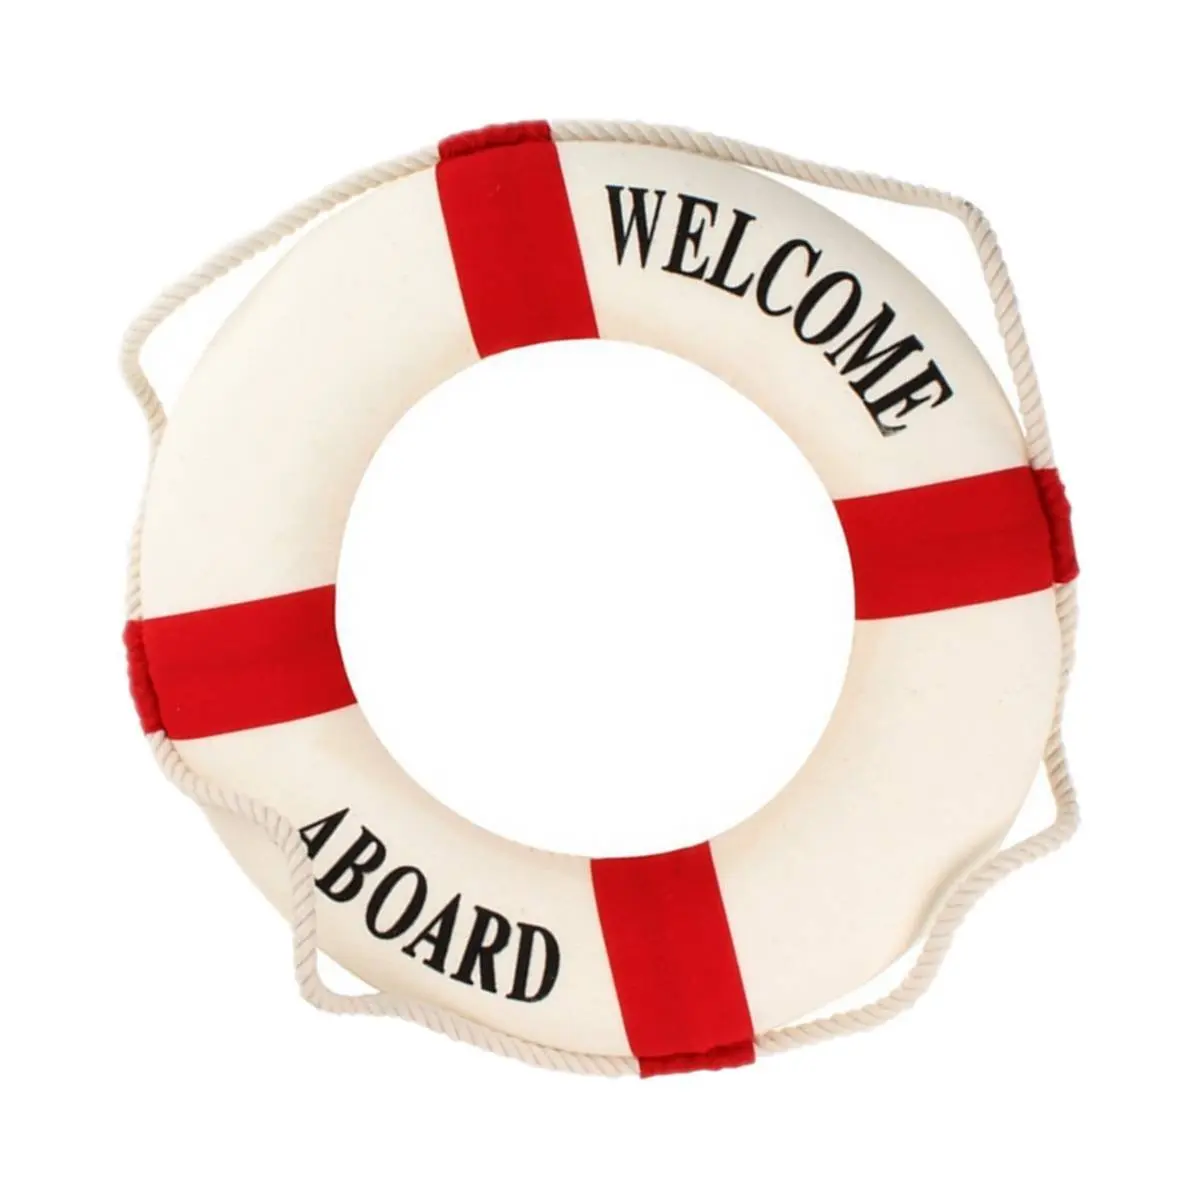 Welcome Aboard Nautical Life Lifebuoy Ring Boat Wall Hanging Home Decoration_ti 